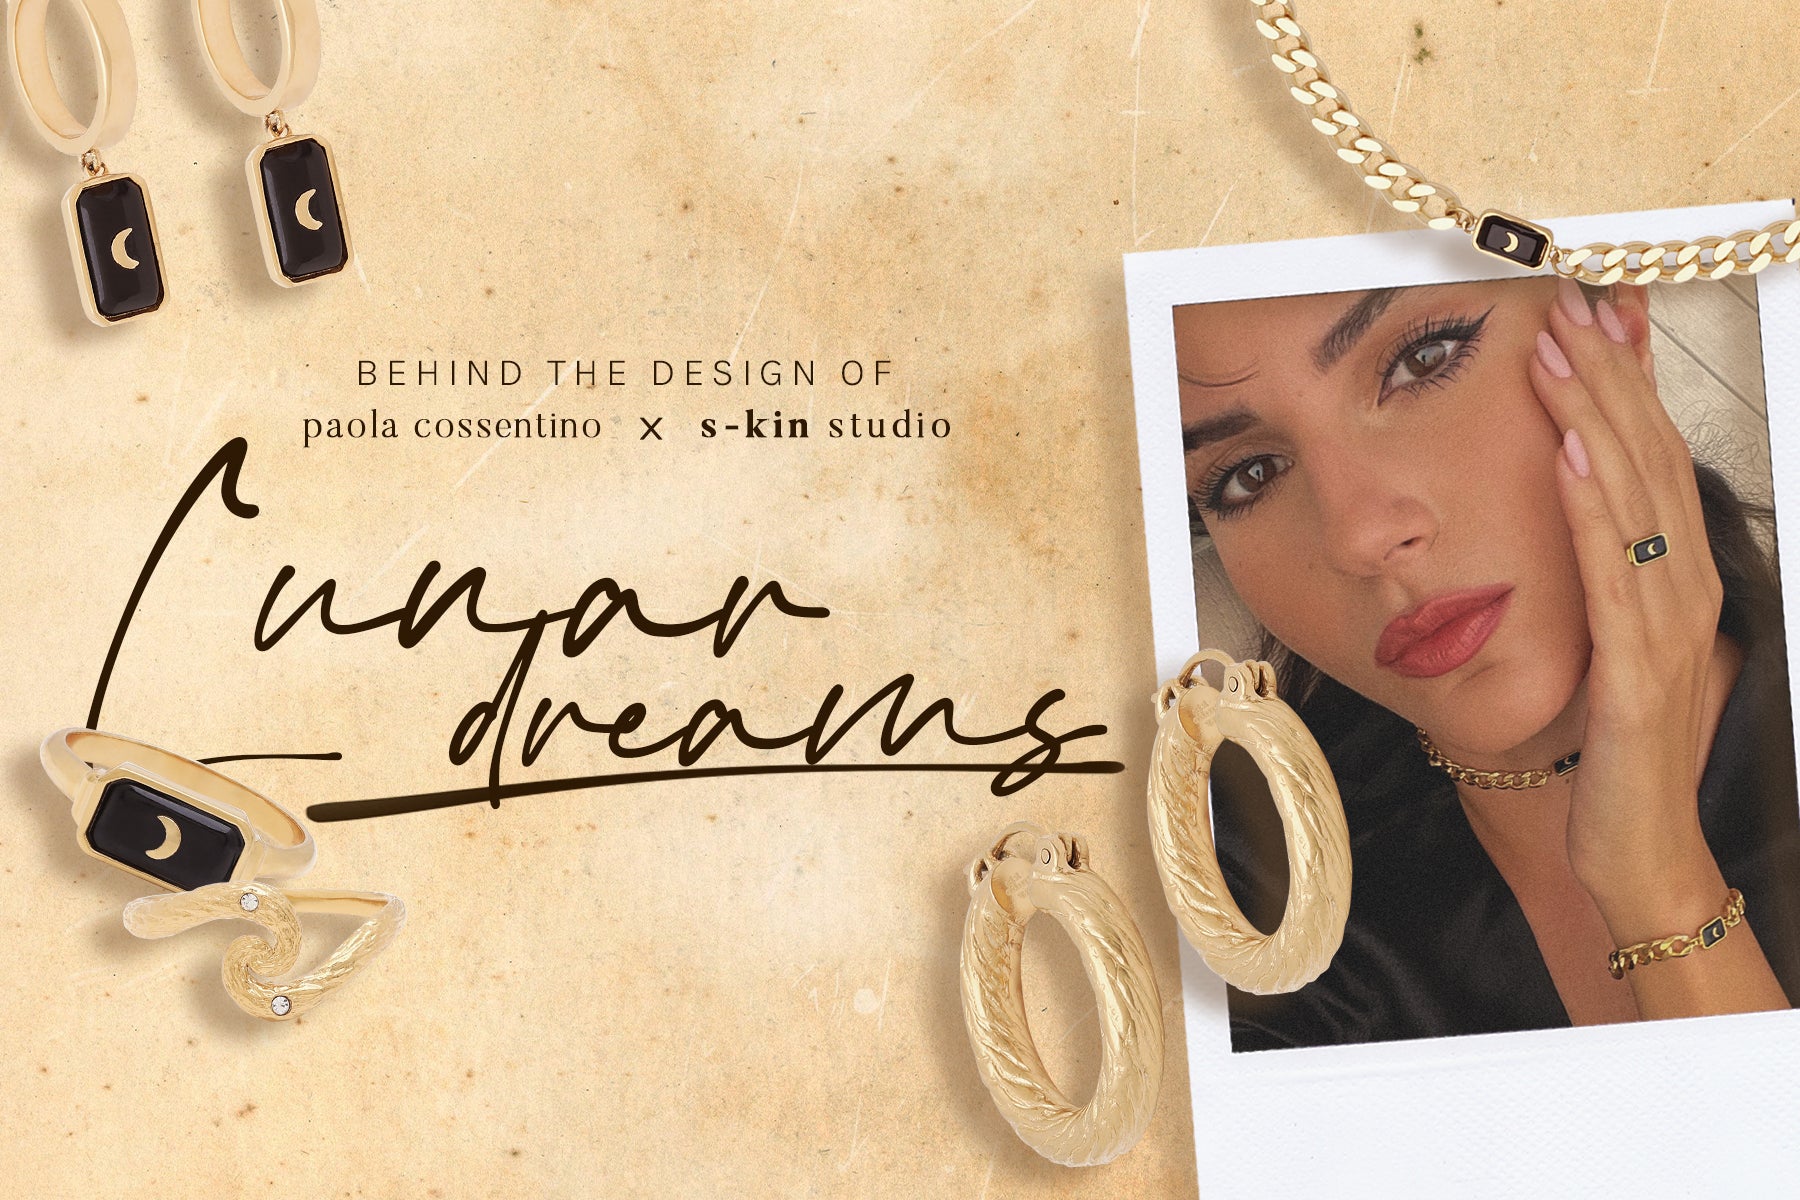 Behind the Design - Lunar Dreams by Paola Cossentino x S-kin Studio